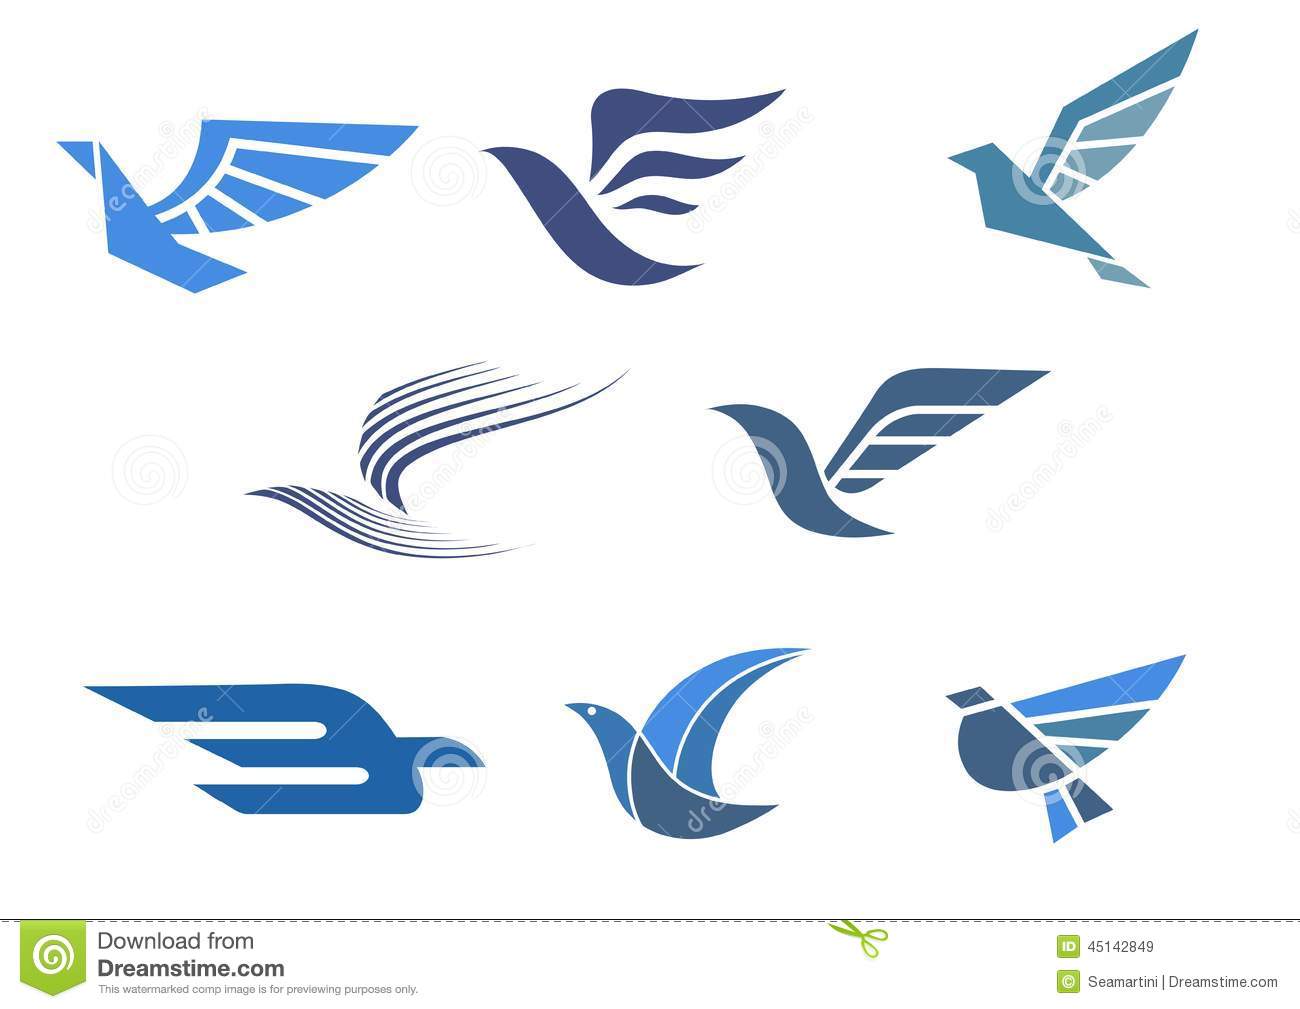 Delivery And Shipping Symbols With Abstract Stylized Flying Bird